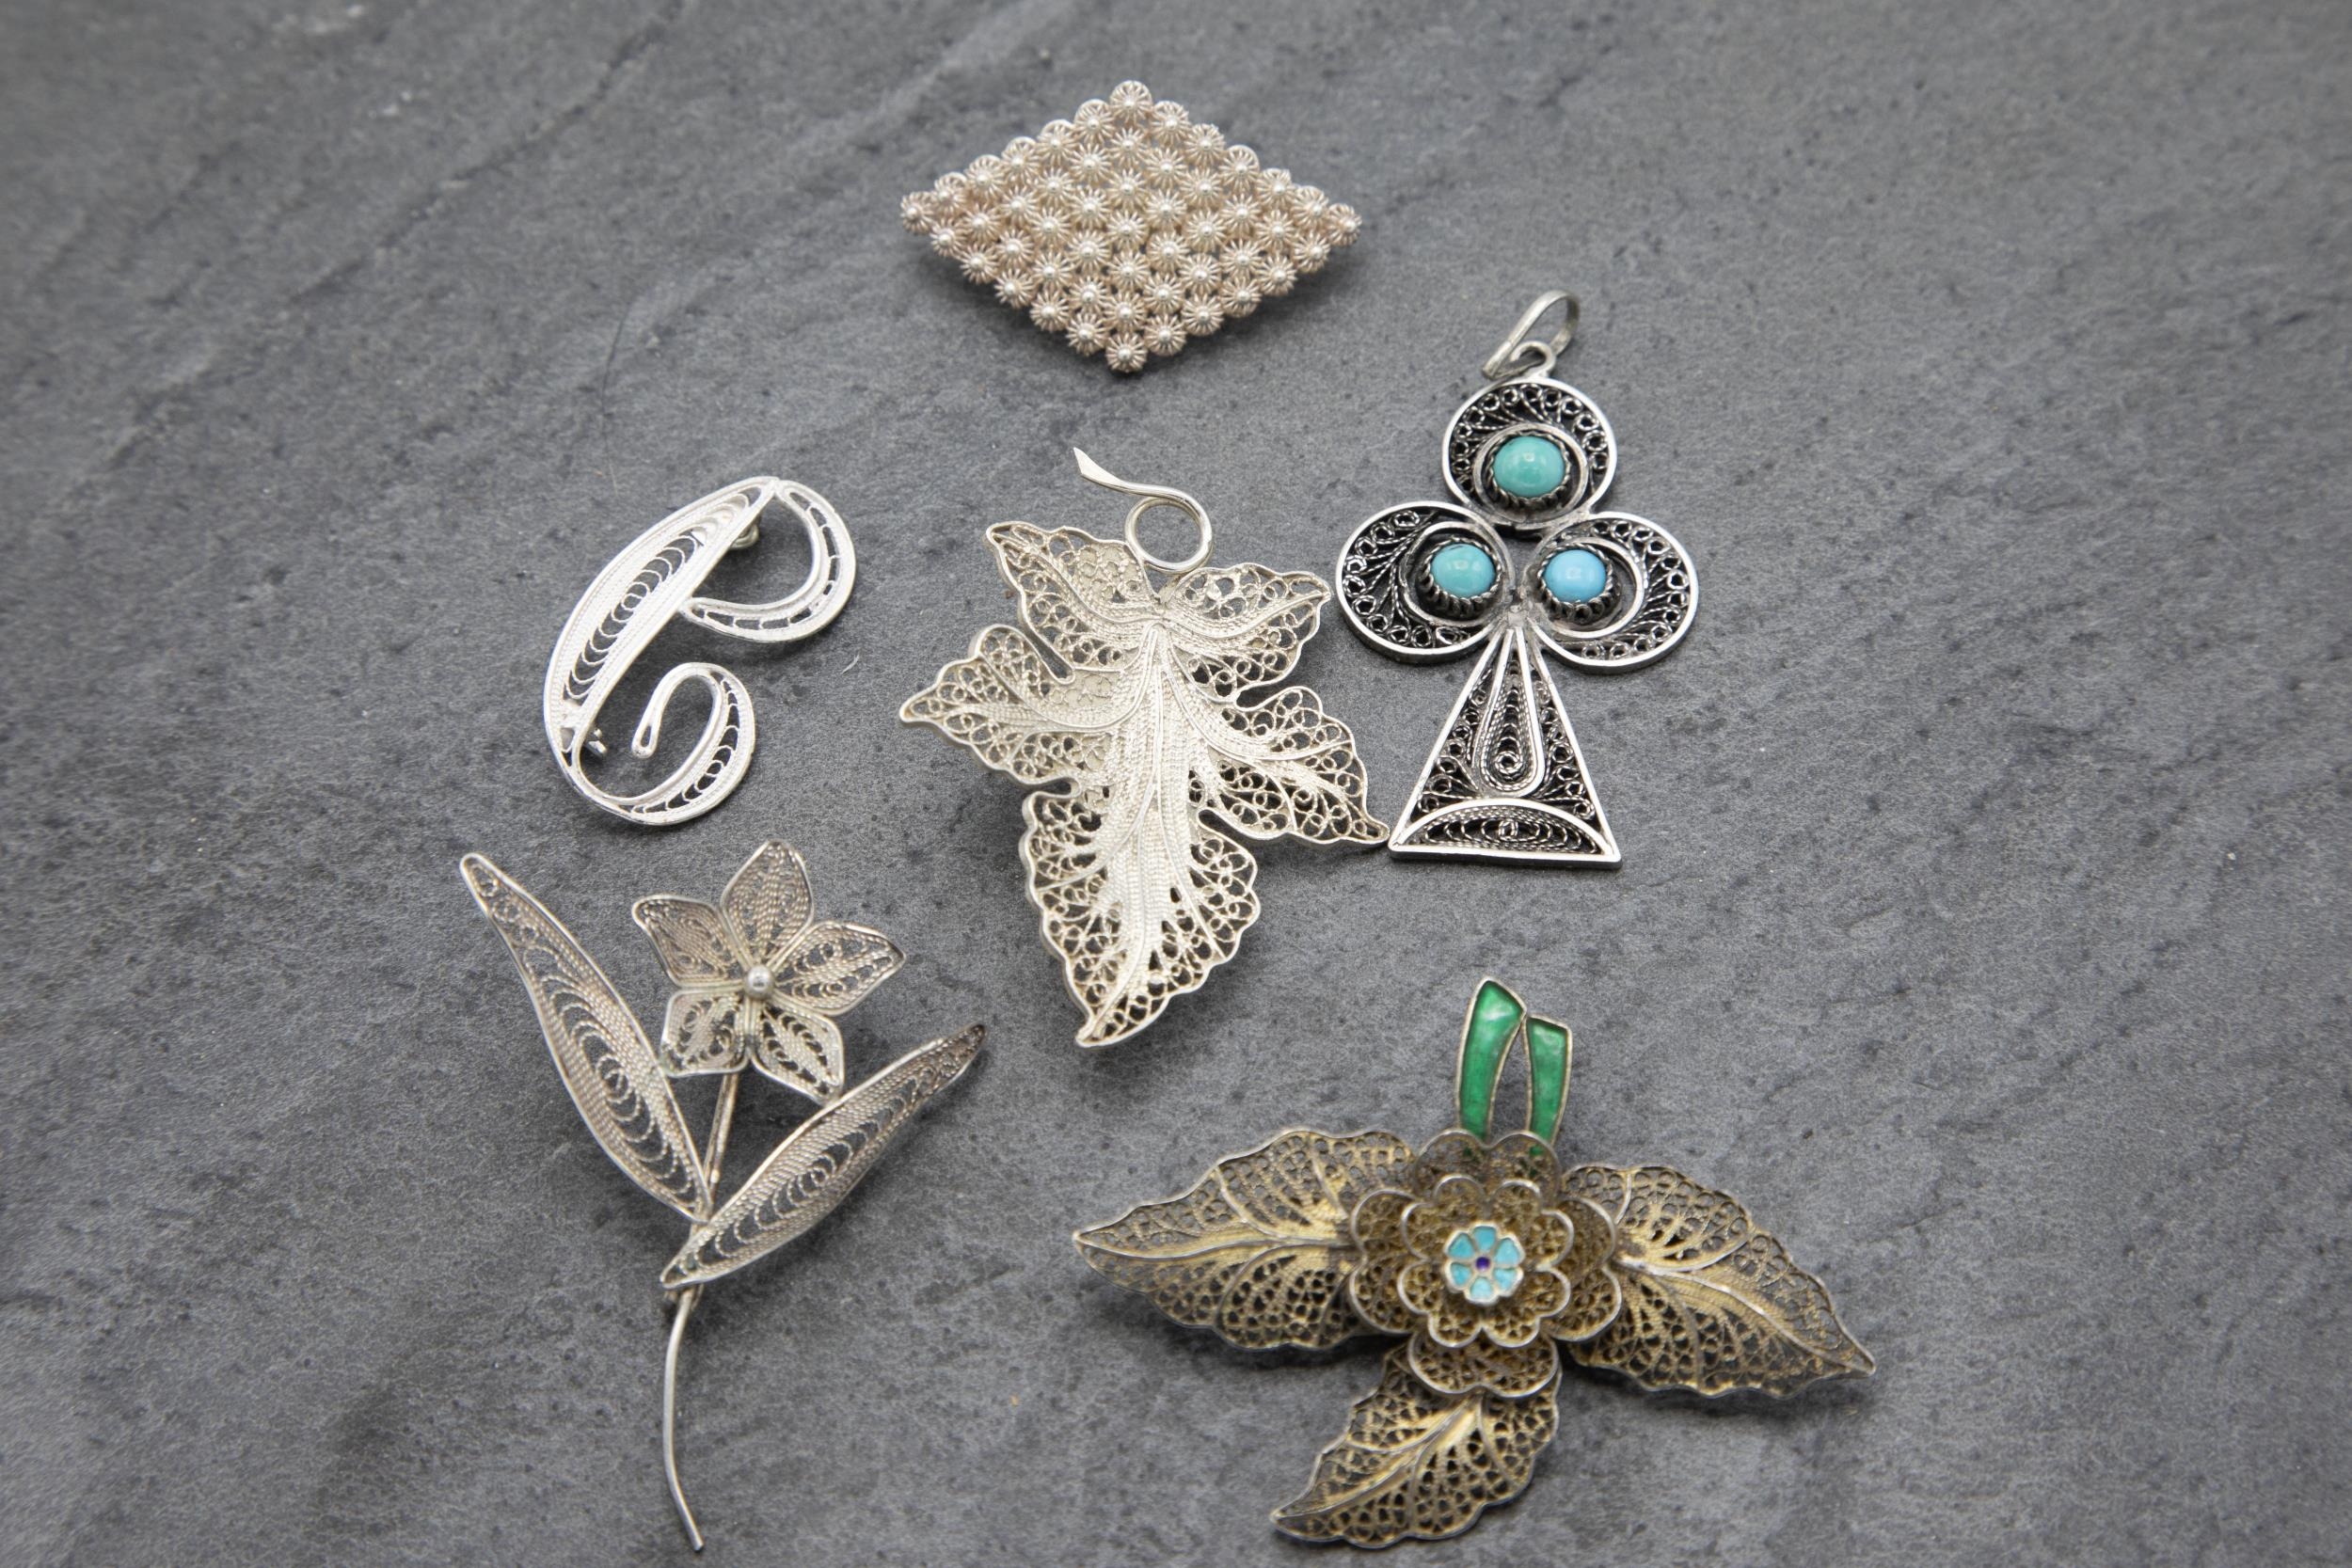 Six filigree silver brooches or pendants to include turquoise inset club pendant and enamelled - Image 2 of 2